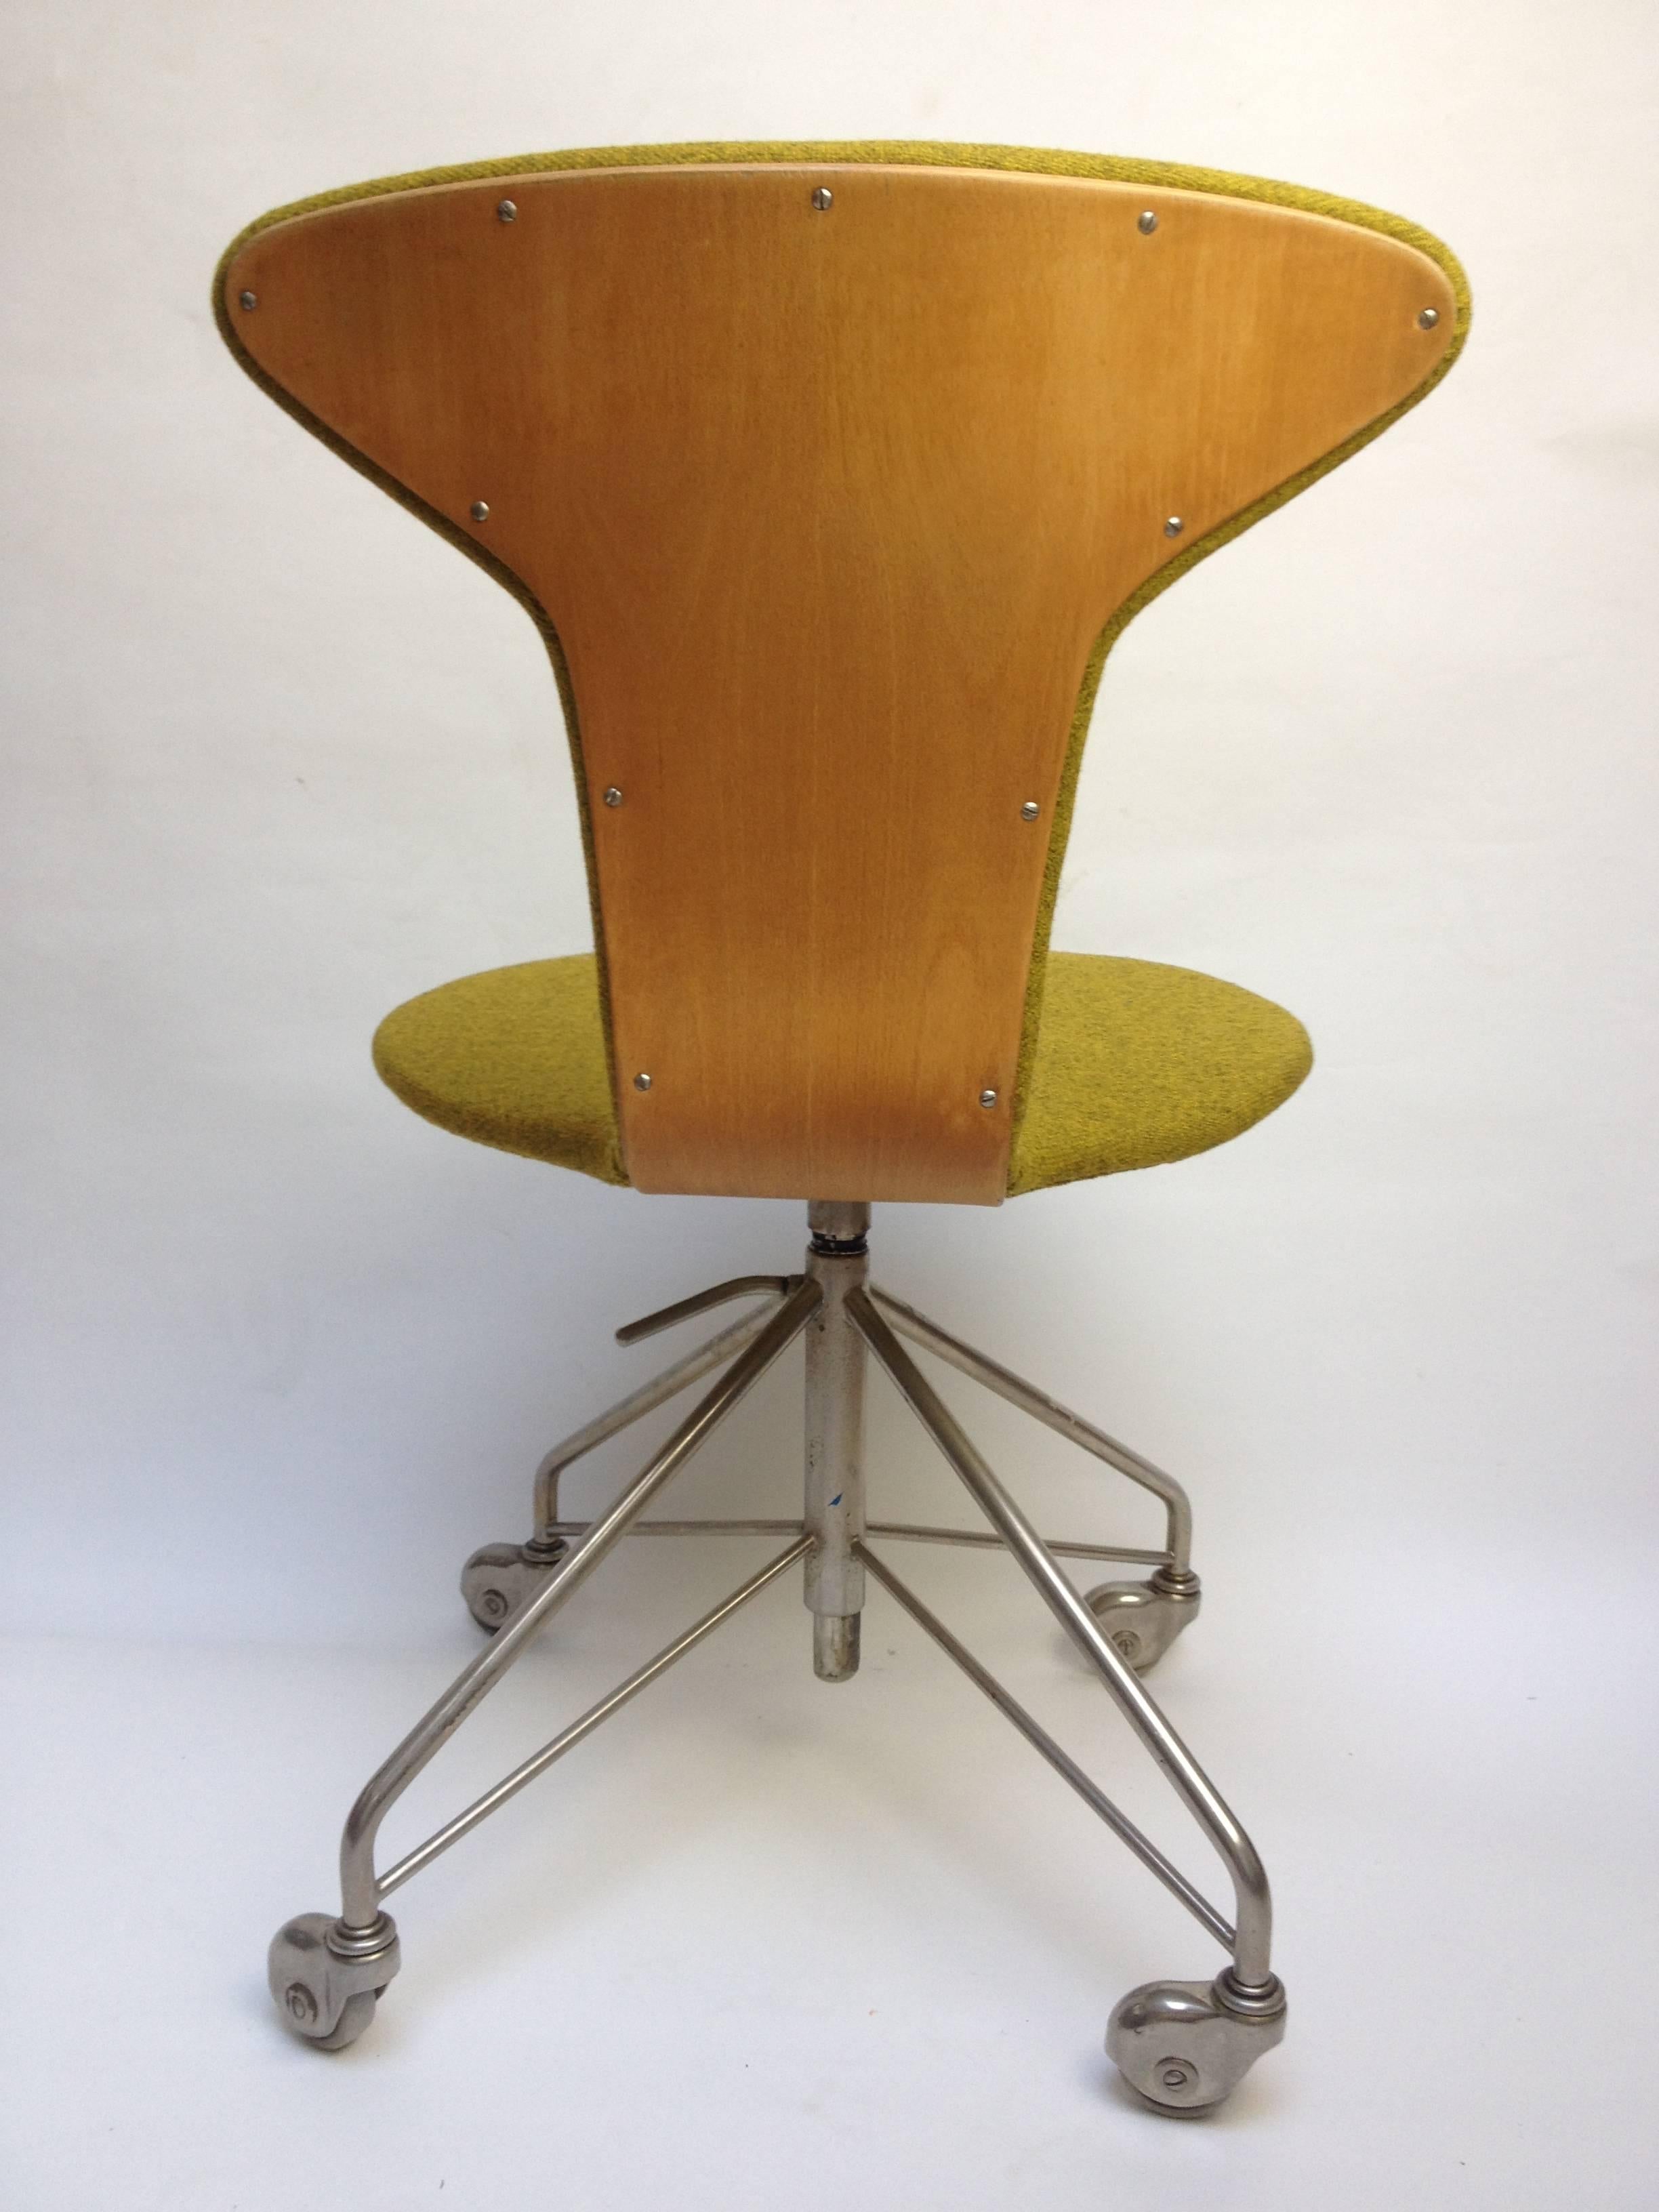 This incredibly rare 1950s designed mosquito office chair by Arne Jacobsen for Fritz Hansen. Made in Denmark has been newly upholstered in a high quality Kvadrat wool blend (mustard yellow). The chair is height adjustable. The rubber on the wheels